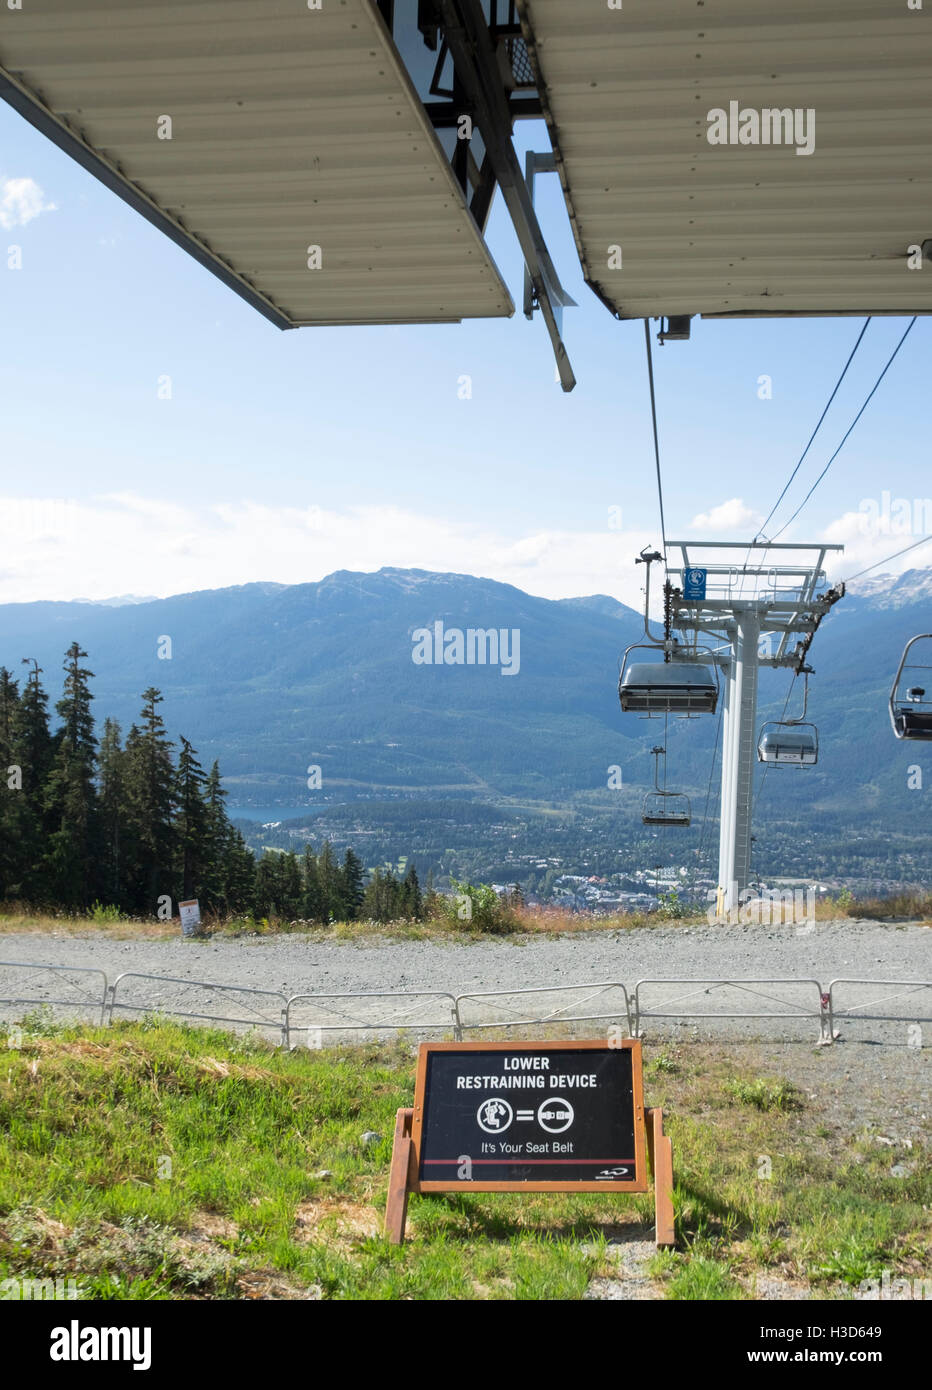 A sign on a chair lift in Whistler British Columbia Canada warns passengers to lower your restraining device. Stock Photo